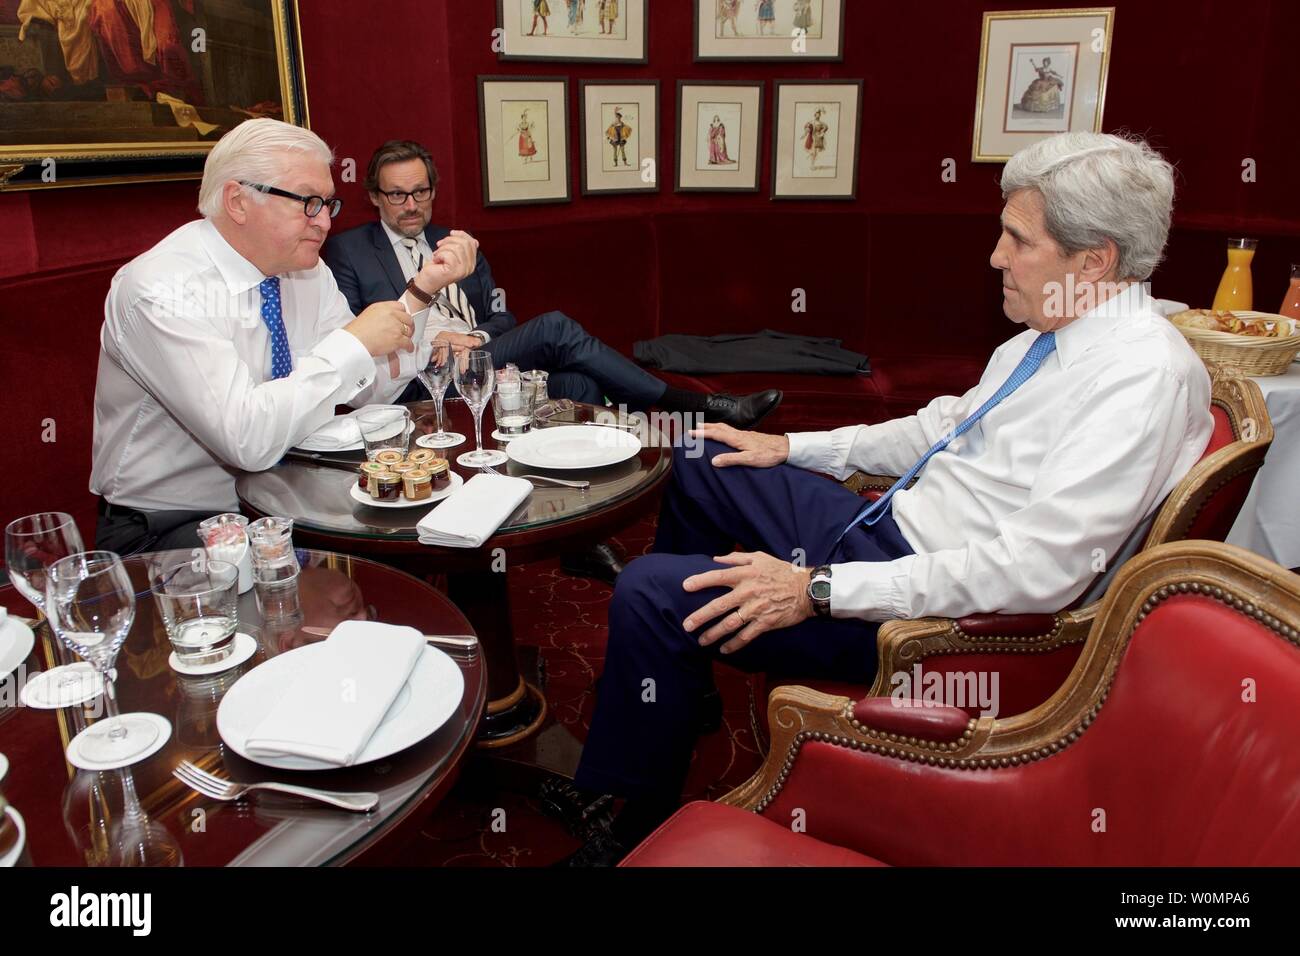 U.S. Secretary of State John Kerry sits with German Foreign Minister Frank-Walter Steinmeier at the Westin Vendome Hotel in Paris, on May 10, 2016, before a bilateral meeting after both diplomats attended a multilateral session focused on Syria hosted by the French government. Photo by U.S. Department of State/UPI Stock Photo